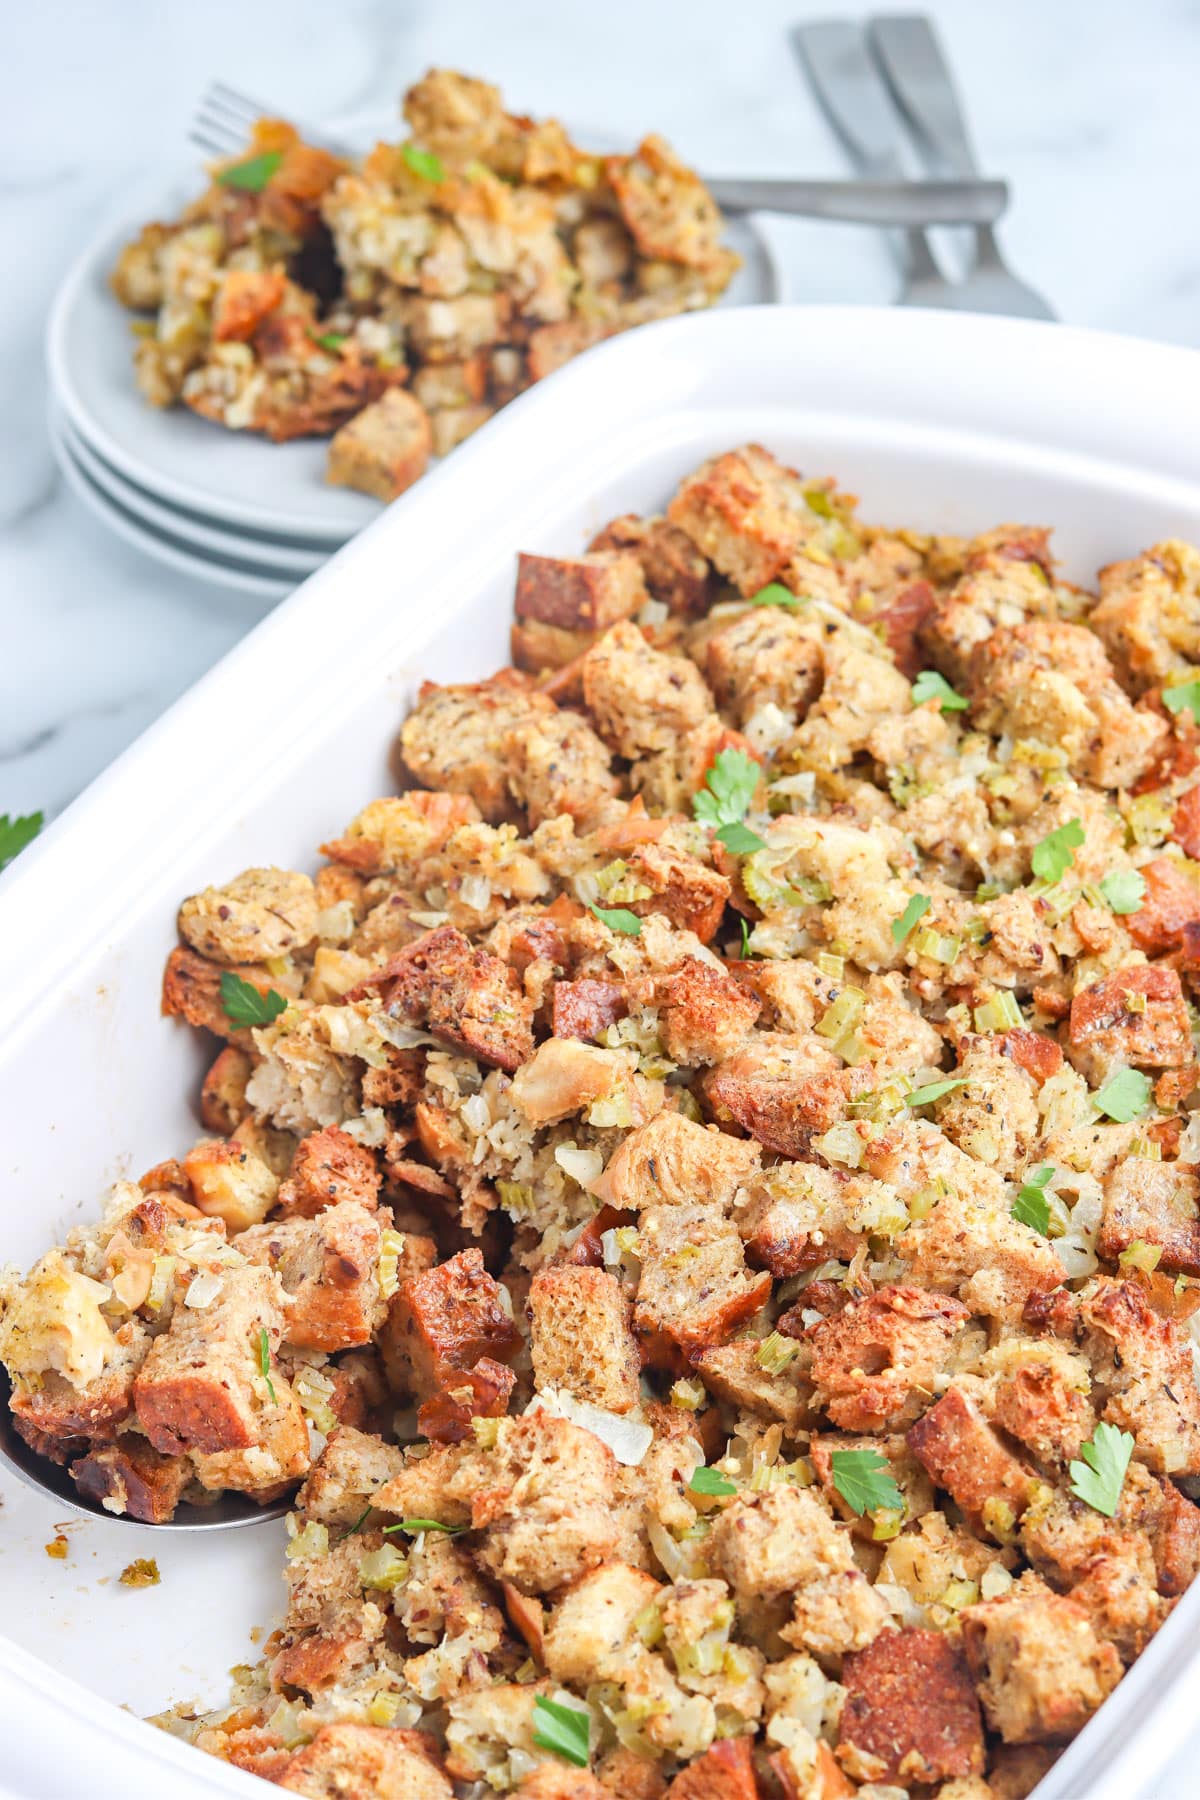 A close up of the finished homemade bread stuffing.